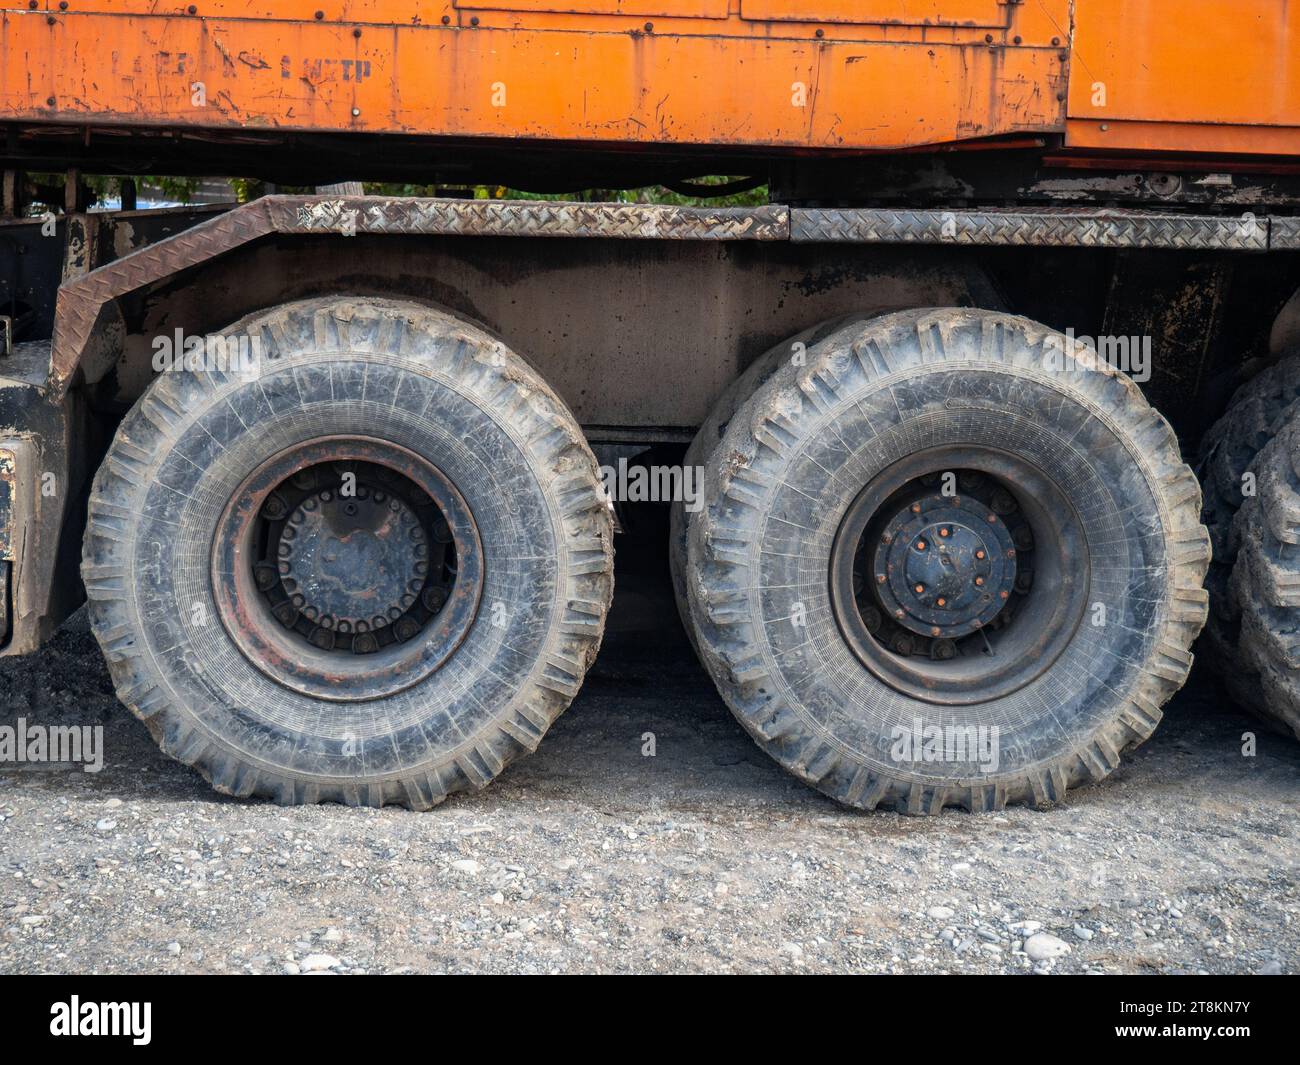 Crane on large wheels. Construction equipment. Non-working hours. Huge wheels Stock Photo